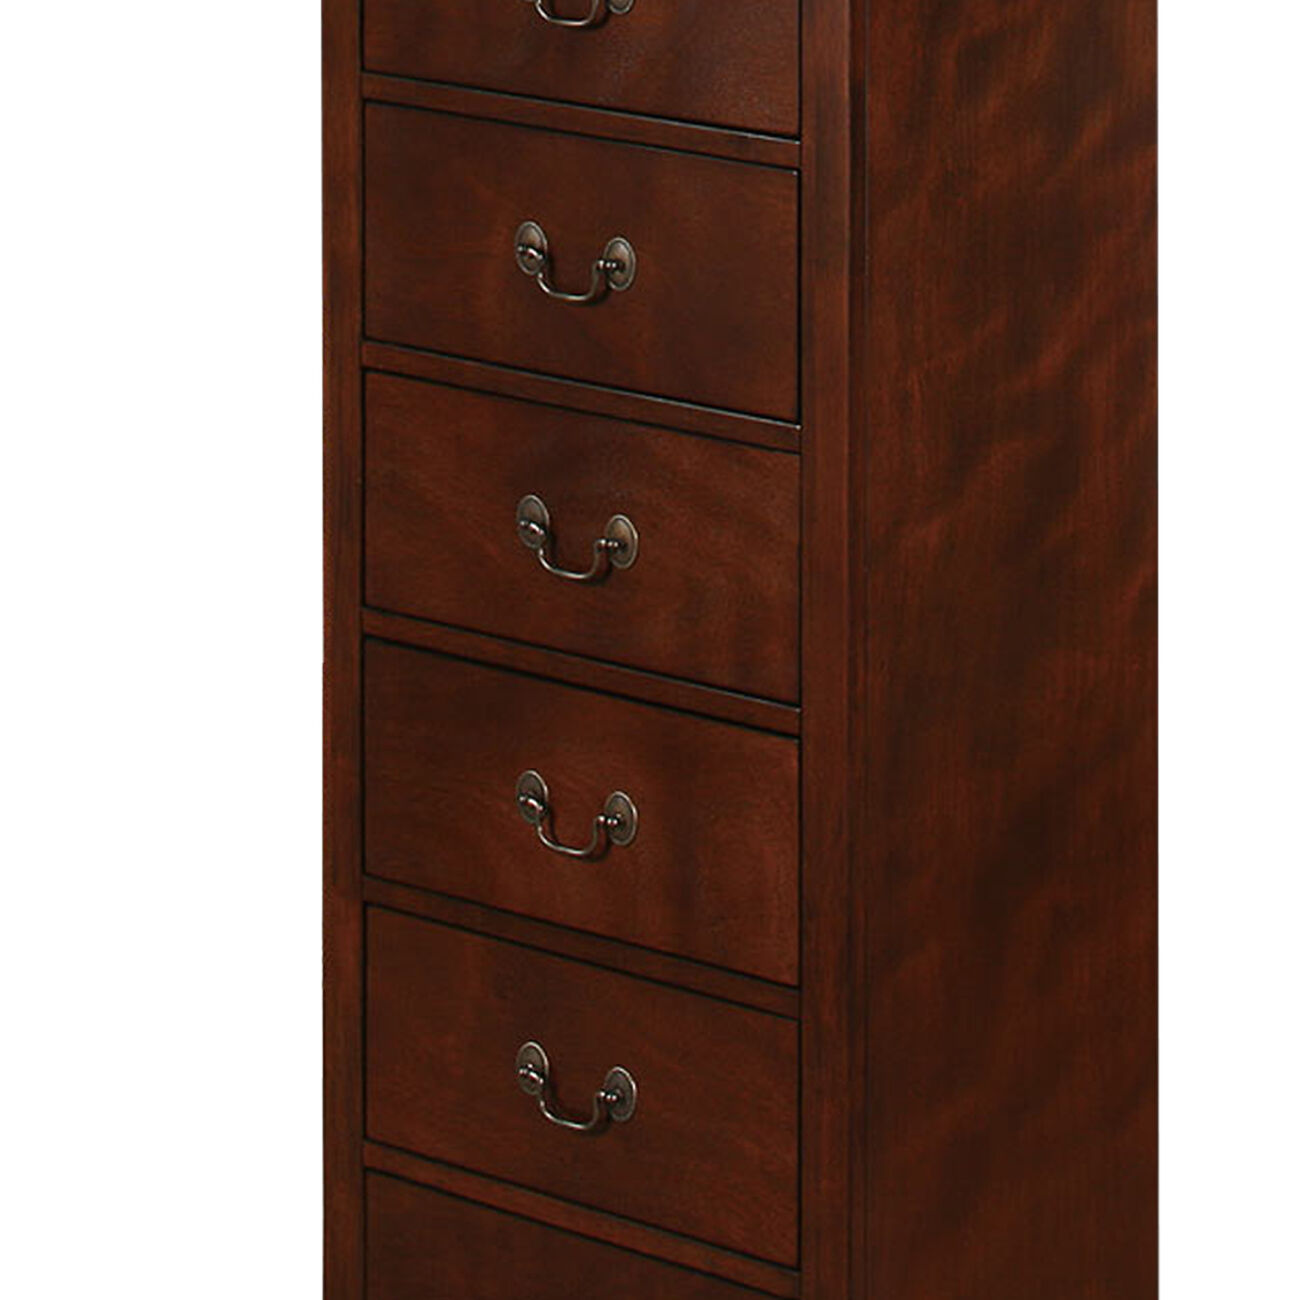 Wooden Lingerie Chest With Hidden Drawer, Cherry Brown